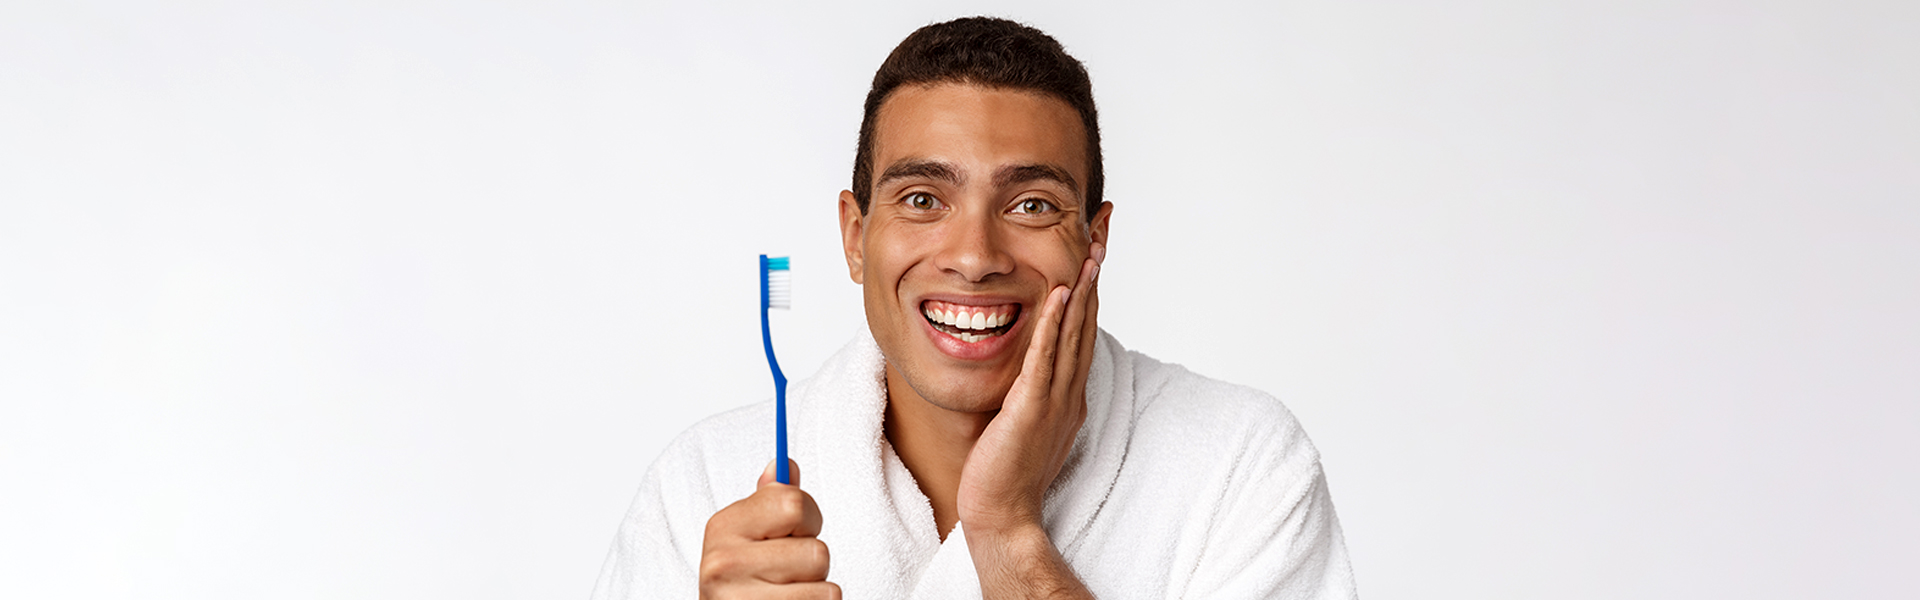 Cut Down on Cavities: The Steps for Proper Toothbrushing